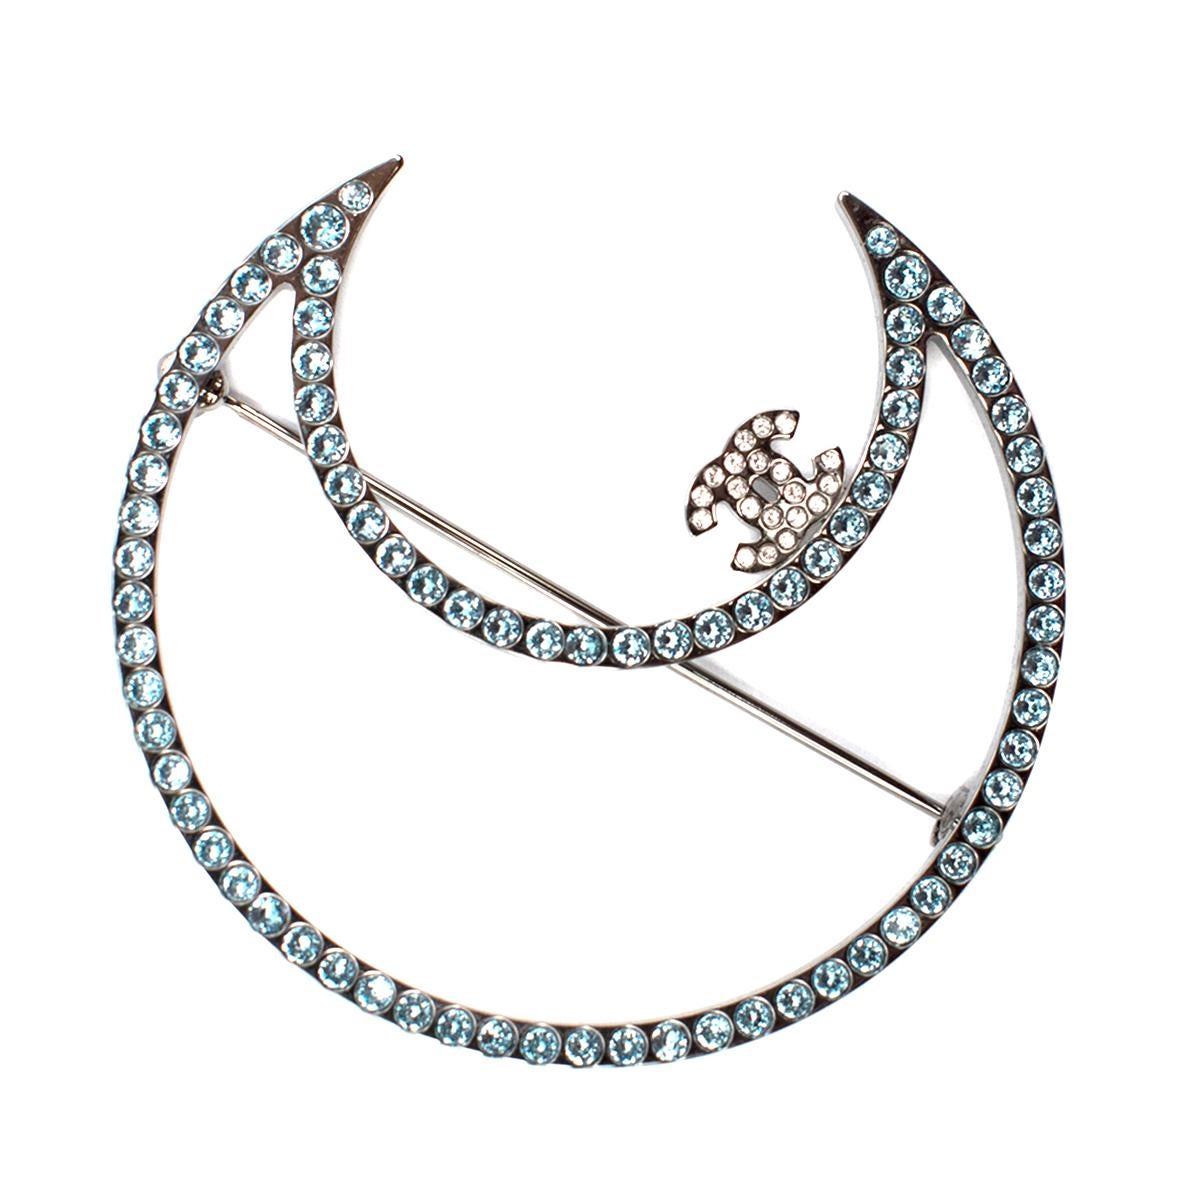 Chanel Jewelled Ruthenium Crescent Moon Brooch

- Moon brooch embellished with blue crystals and brand logo 
- Discrete embossed Chanel G17 K hallmark 
- Safety catch pin with fastening 
- Lightweight 

Please note, these items are pre-owned and may